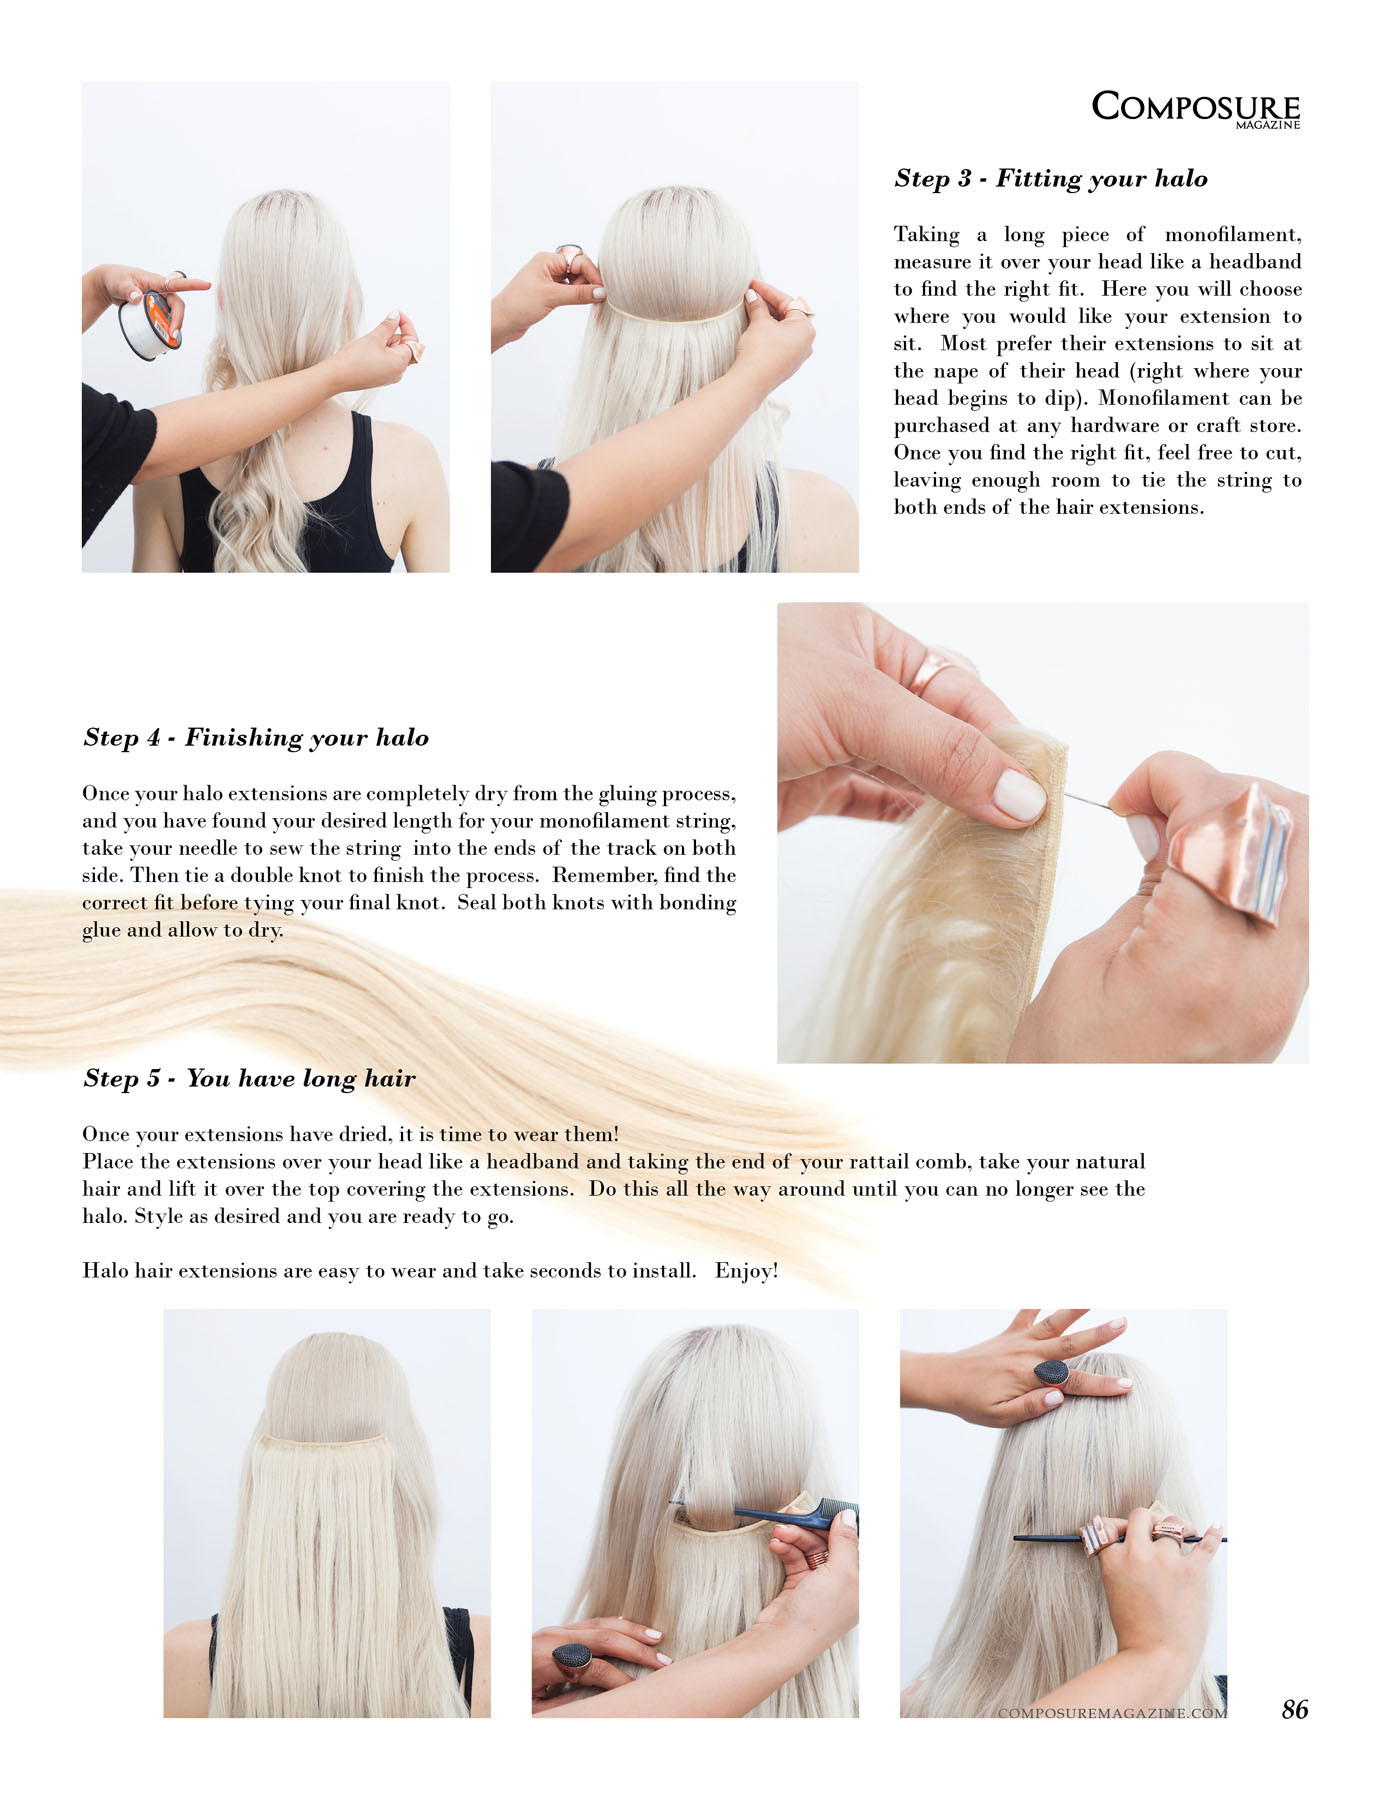 DIY Halo Hair Extensions
 Beauty Halo Hair Extensions – posure Magazine